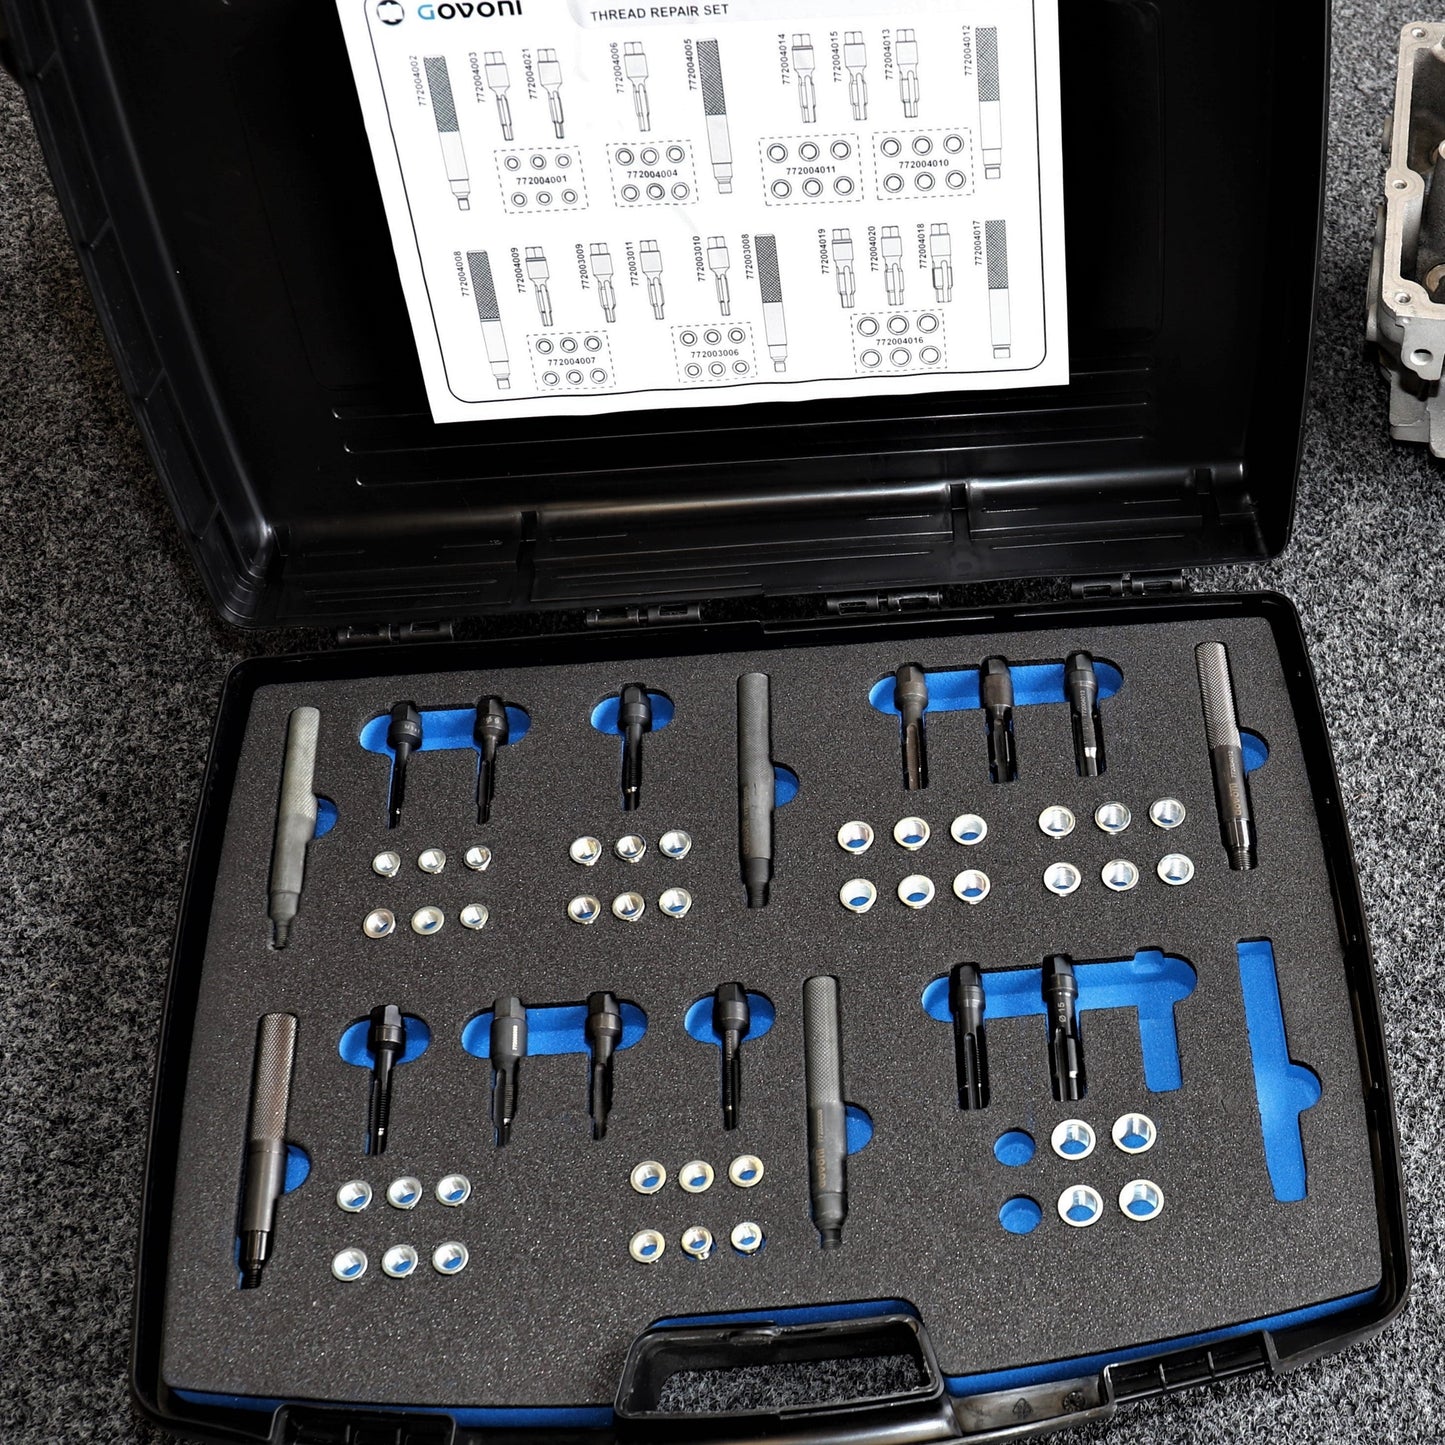 Fast and effective repair tool for damage to cylinder head glow plug threads. Set includes tools for the precise insertion of threaded inserts into the head and features a unique tap guide system to ensure their correct alignment. Includes four sizes of threaded adaptors suitable for common sizes of glow plug.